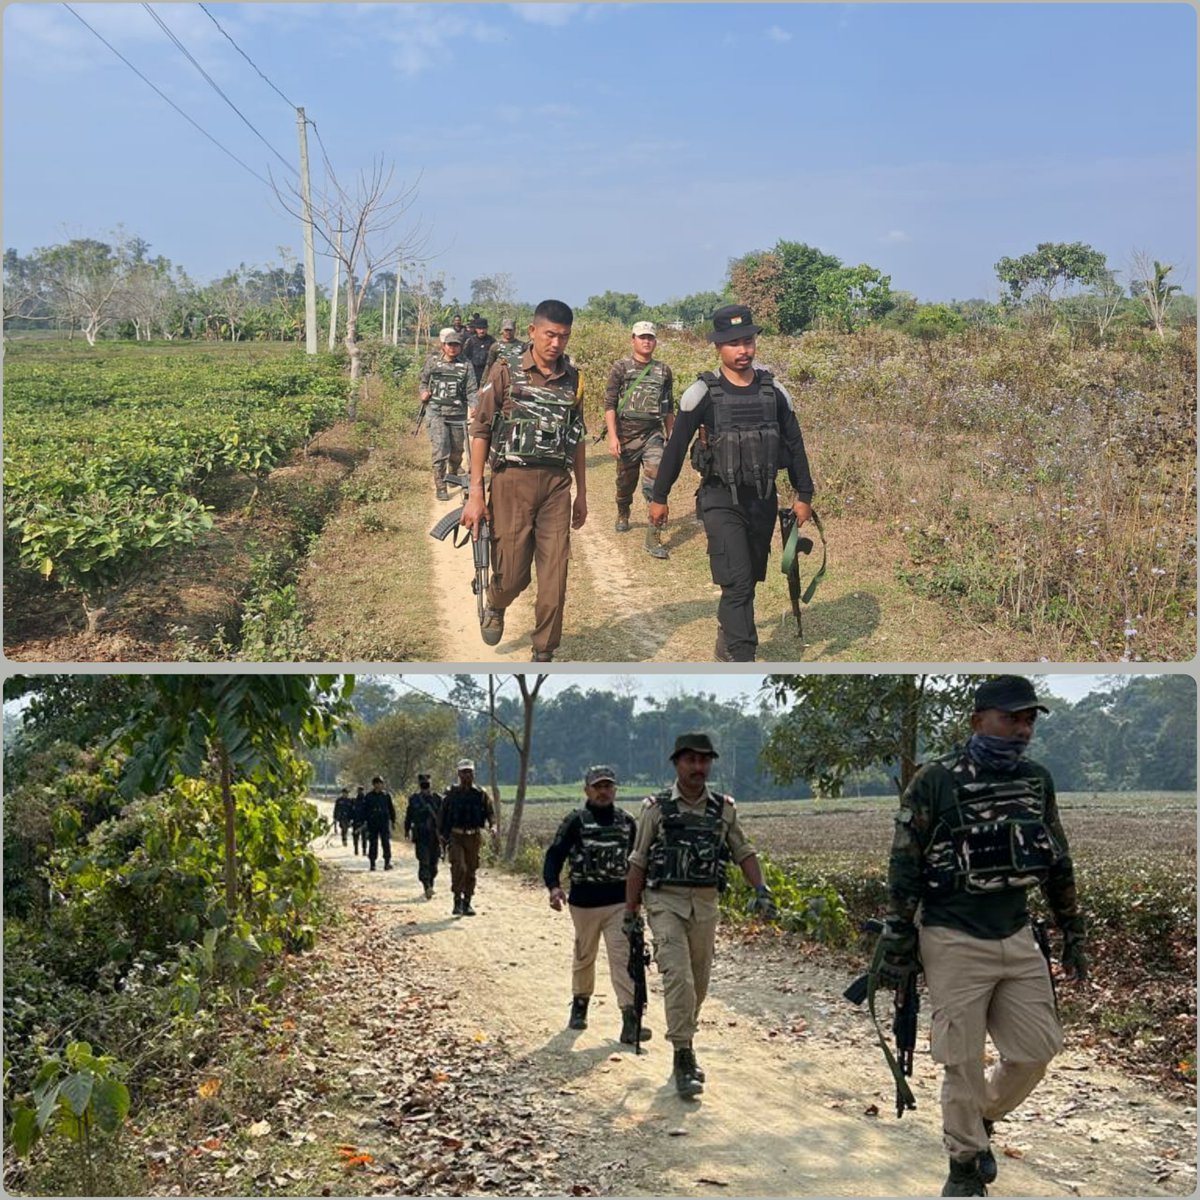 Area domination by in all parts of the district by Tinsukia Police teams led by senior officers. @assampolice @gpsinghips @CMOfficeAssam @DGPAssamPolice @HardiSpeaks